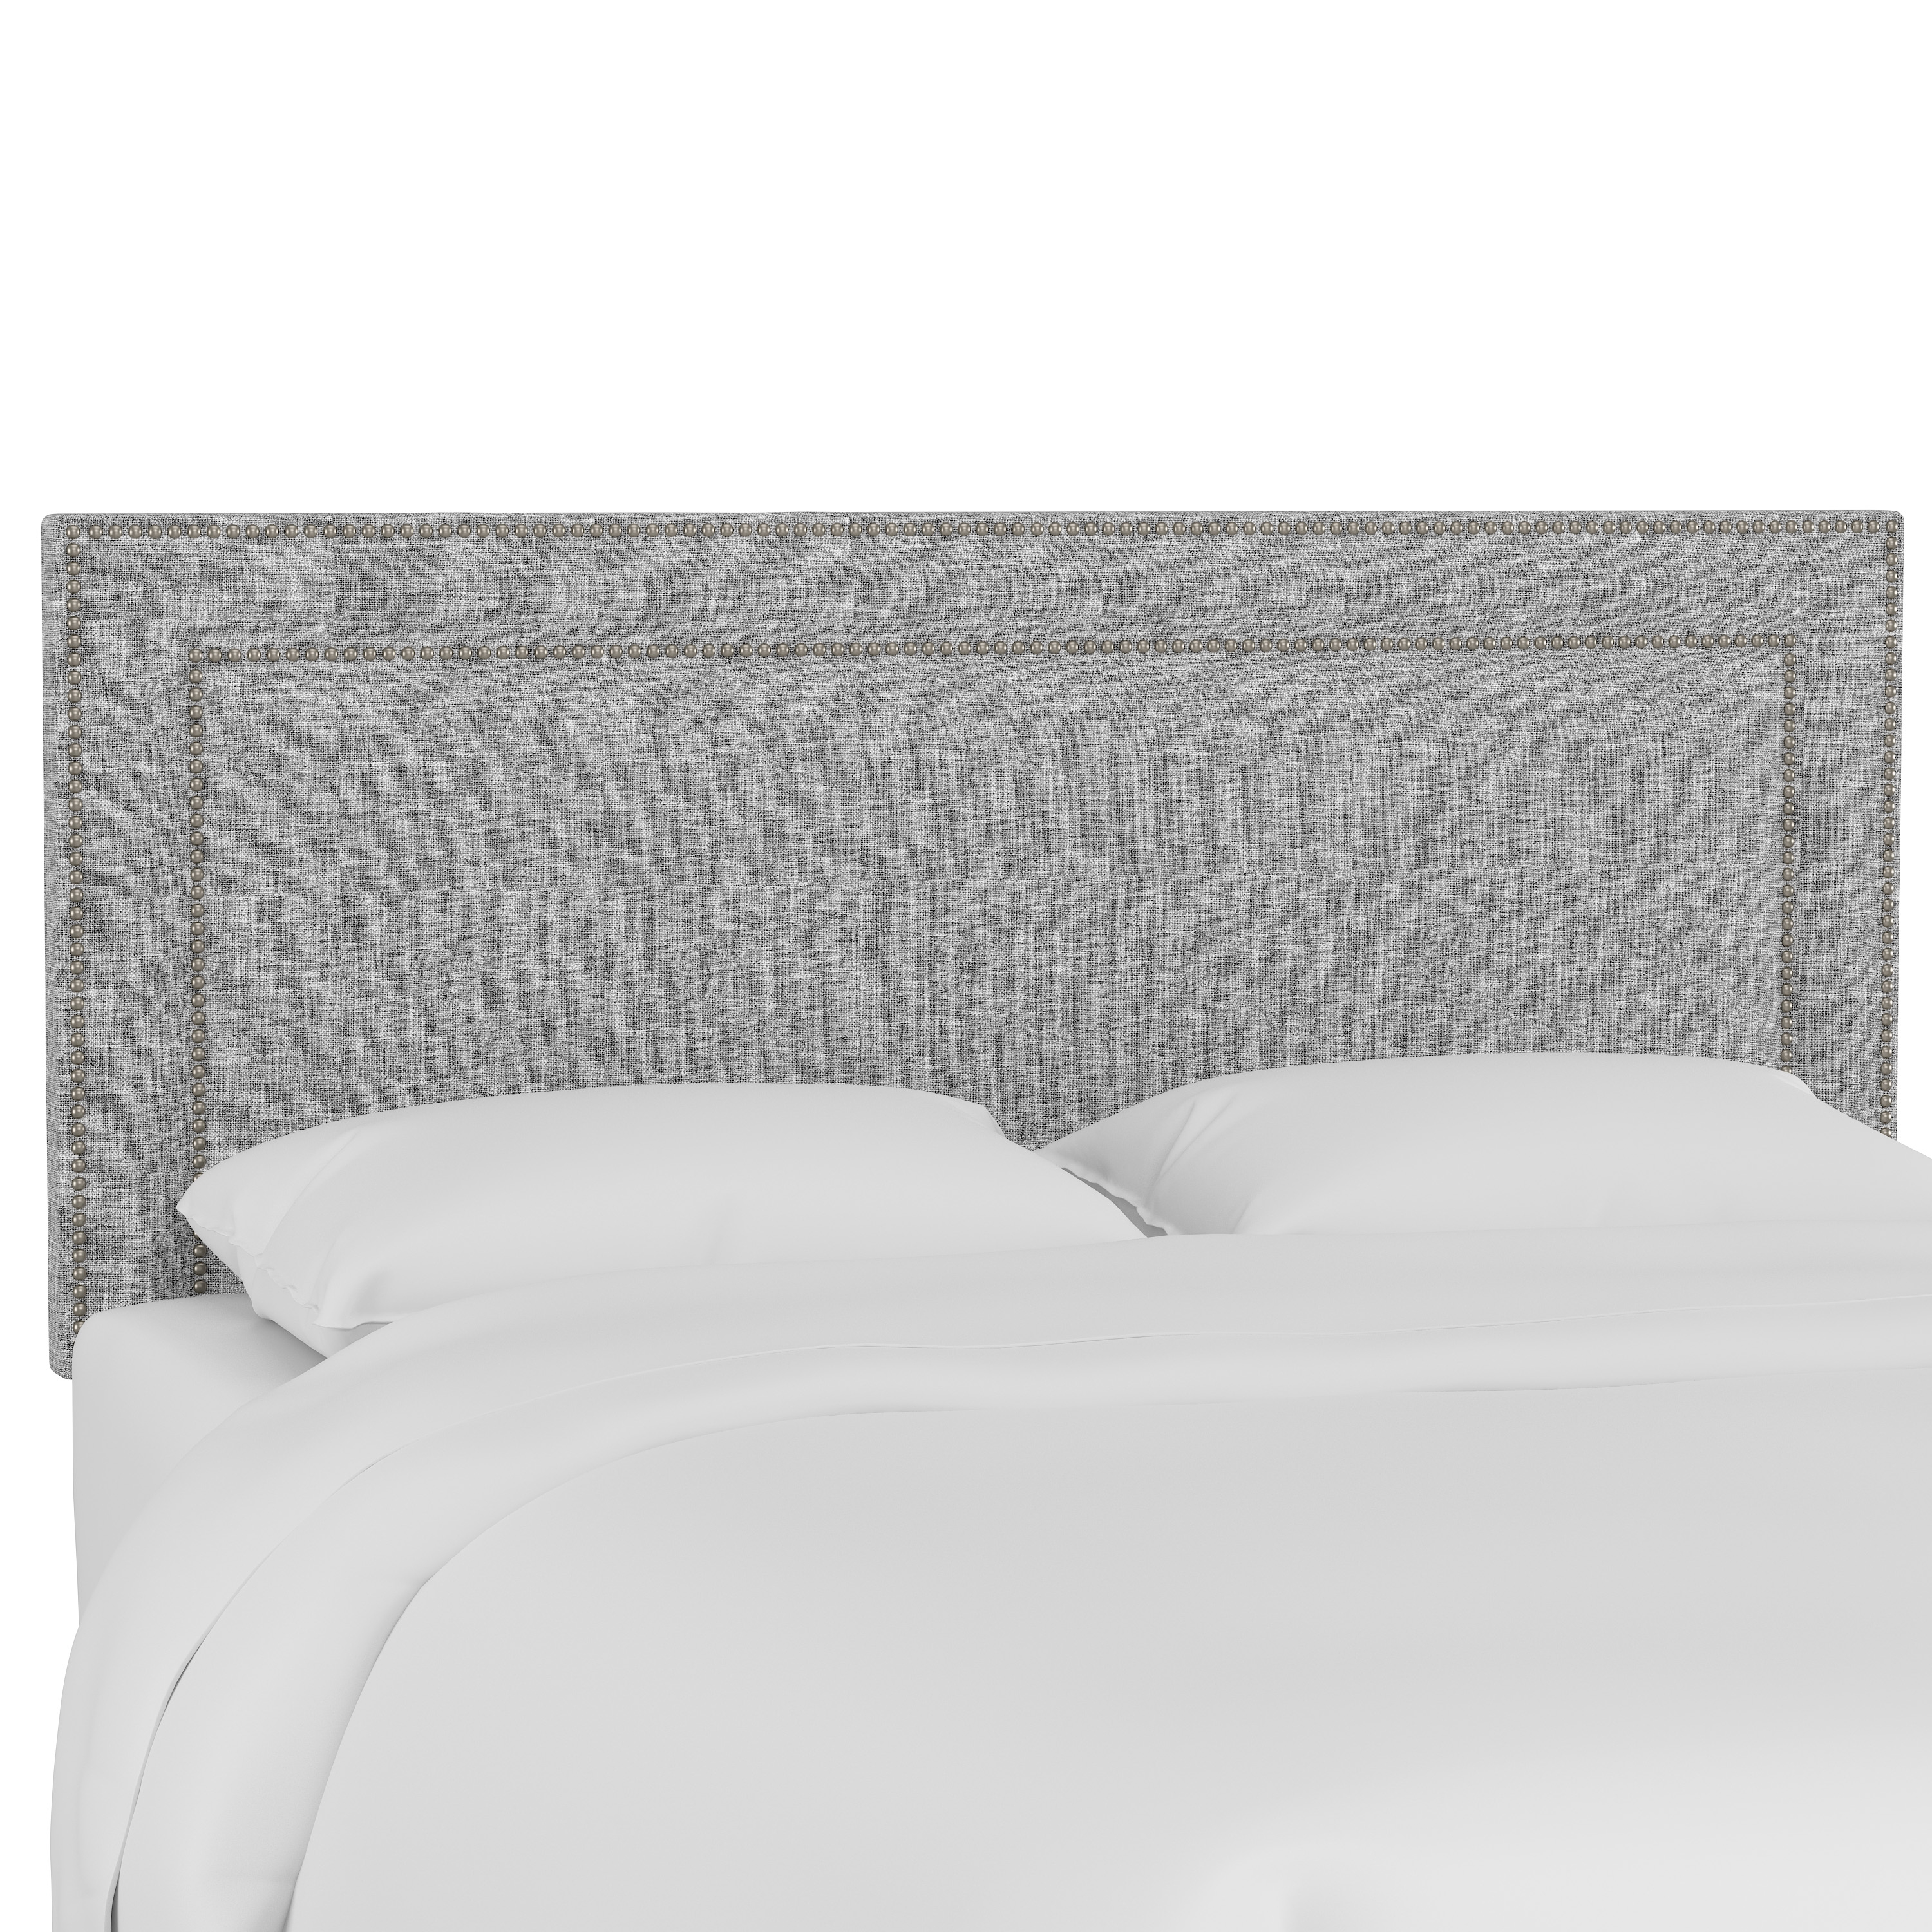 Queen Kimball Headboard, Pewter Nailheads - Image 0